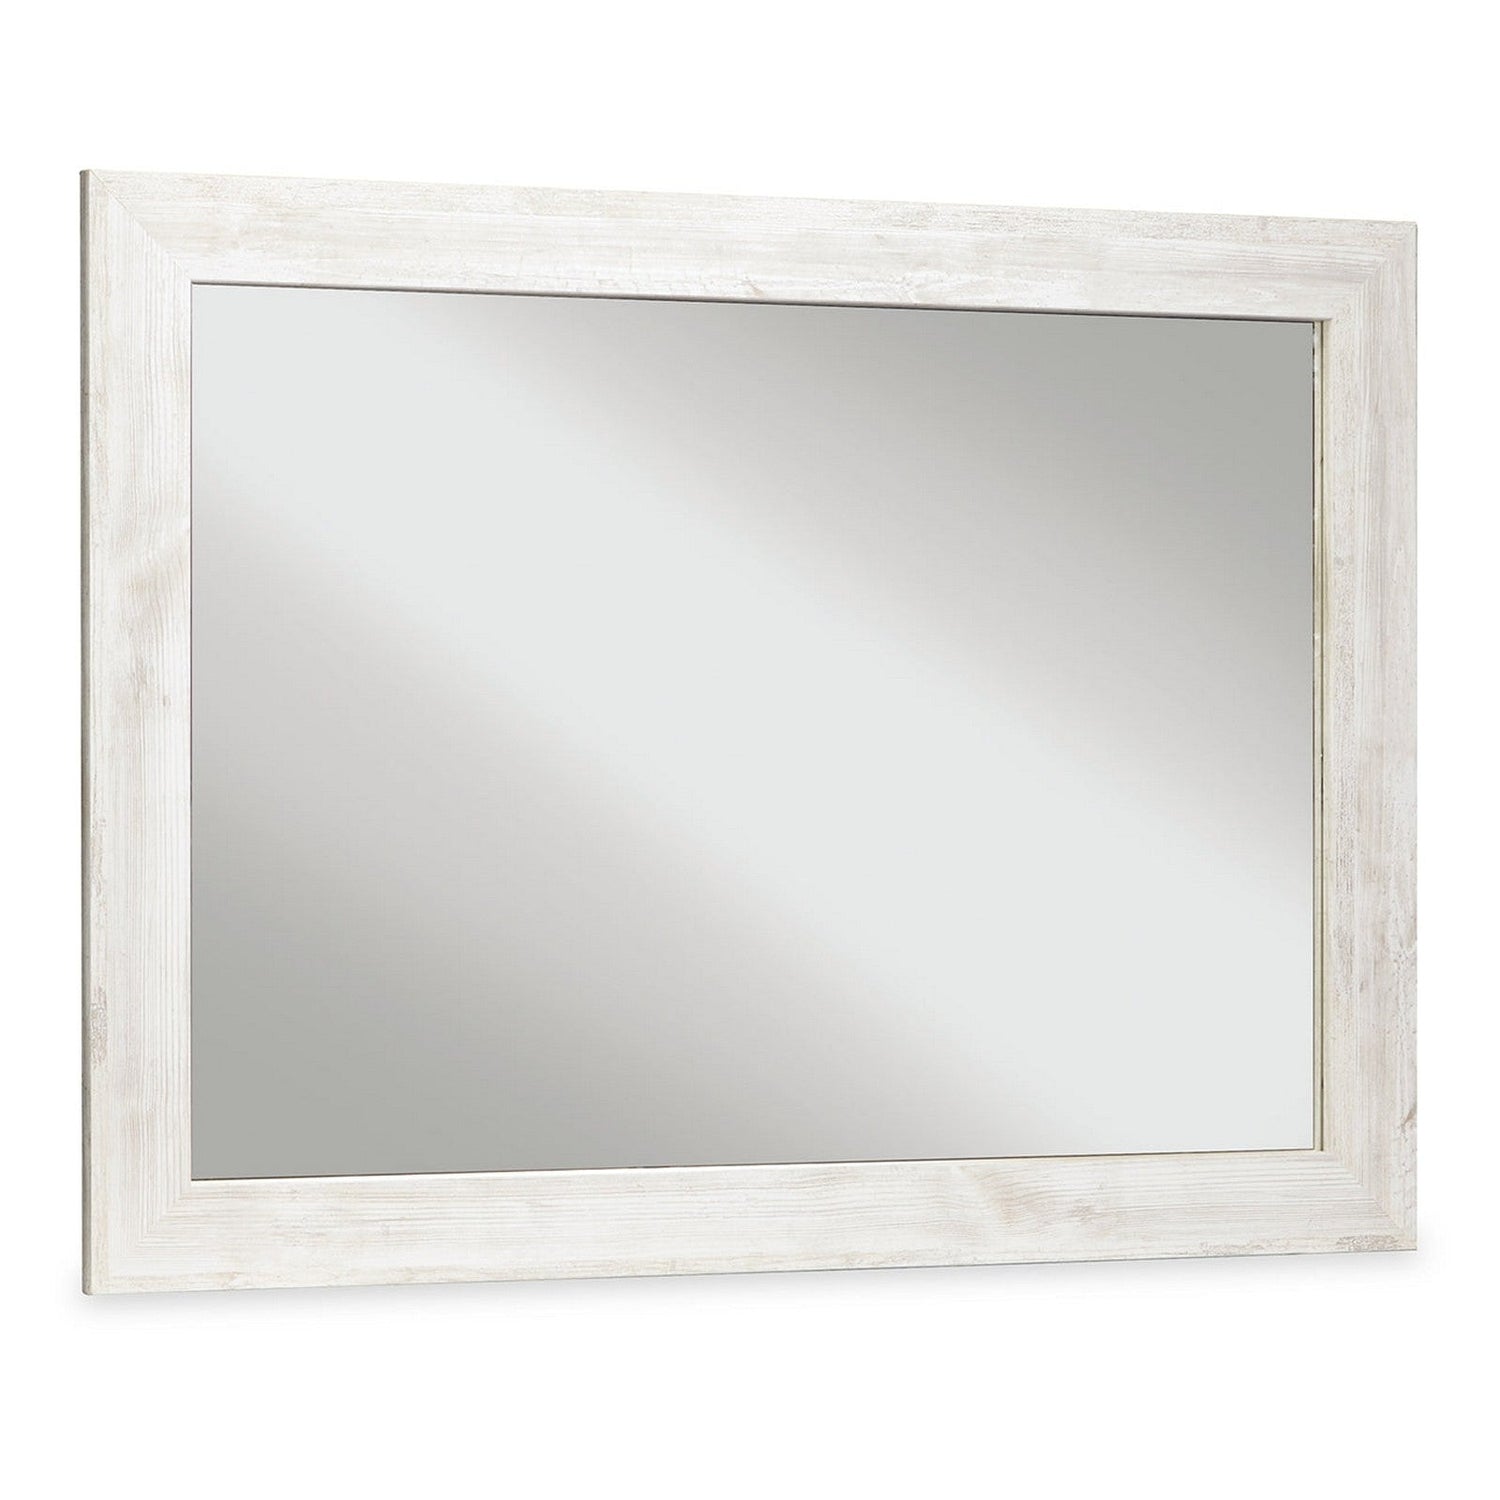 Paxberry Bedroom Mirror Ash-B181-36